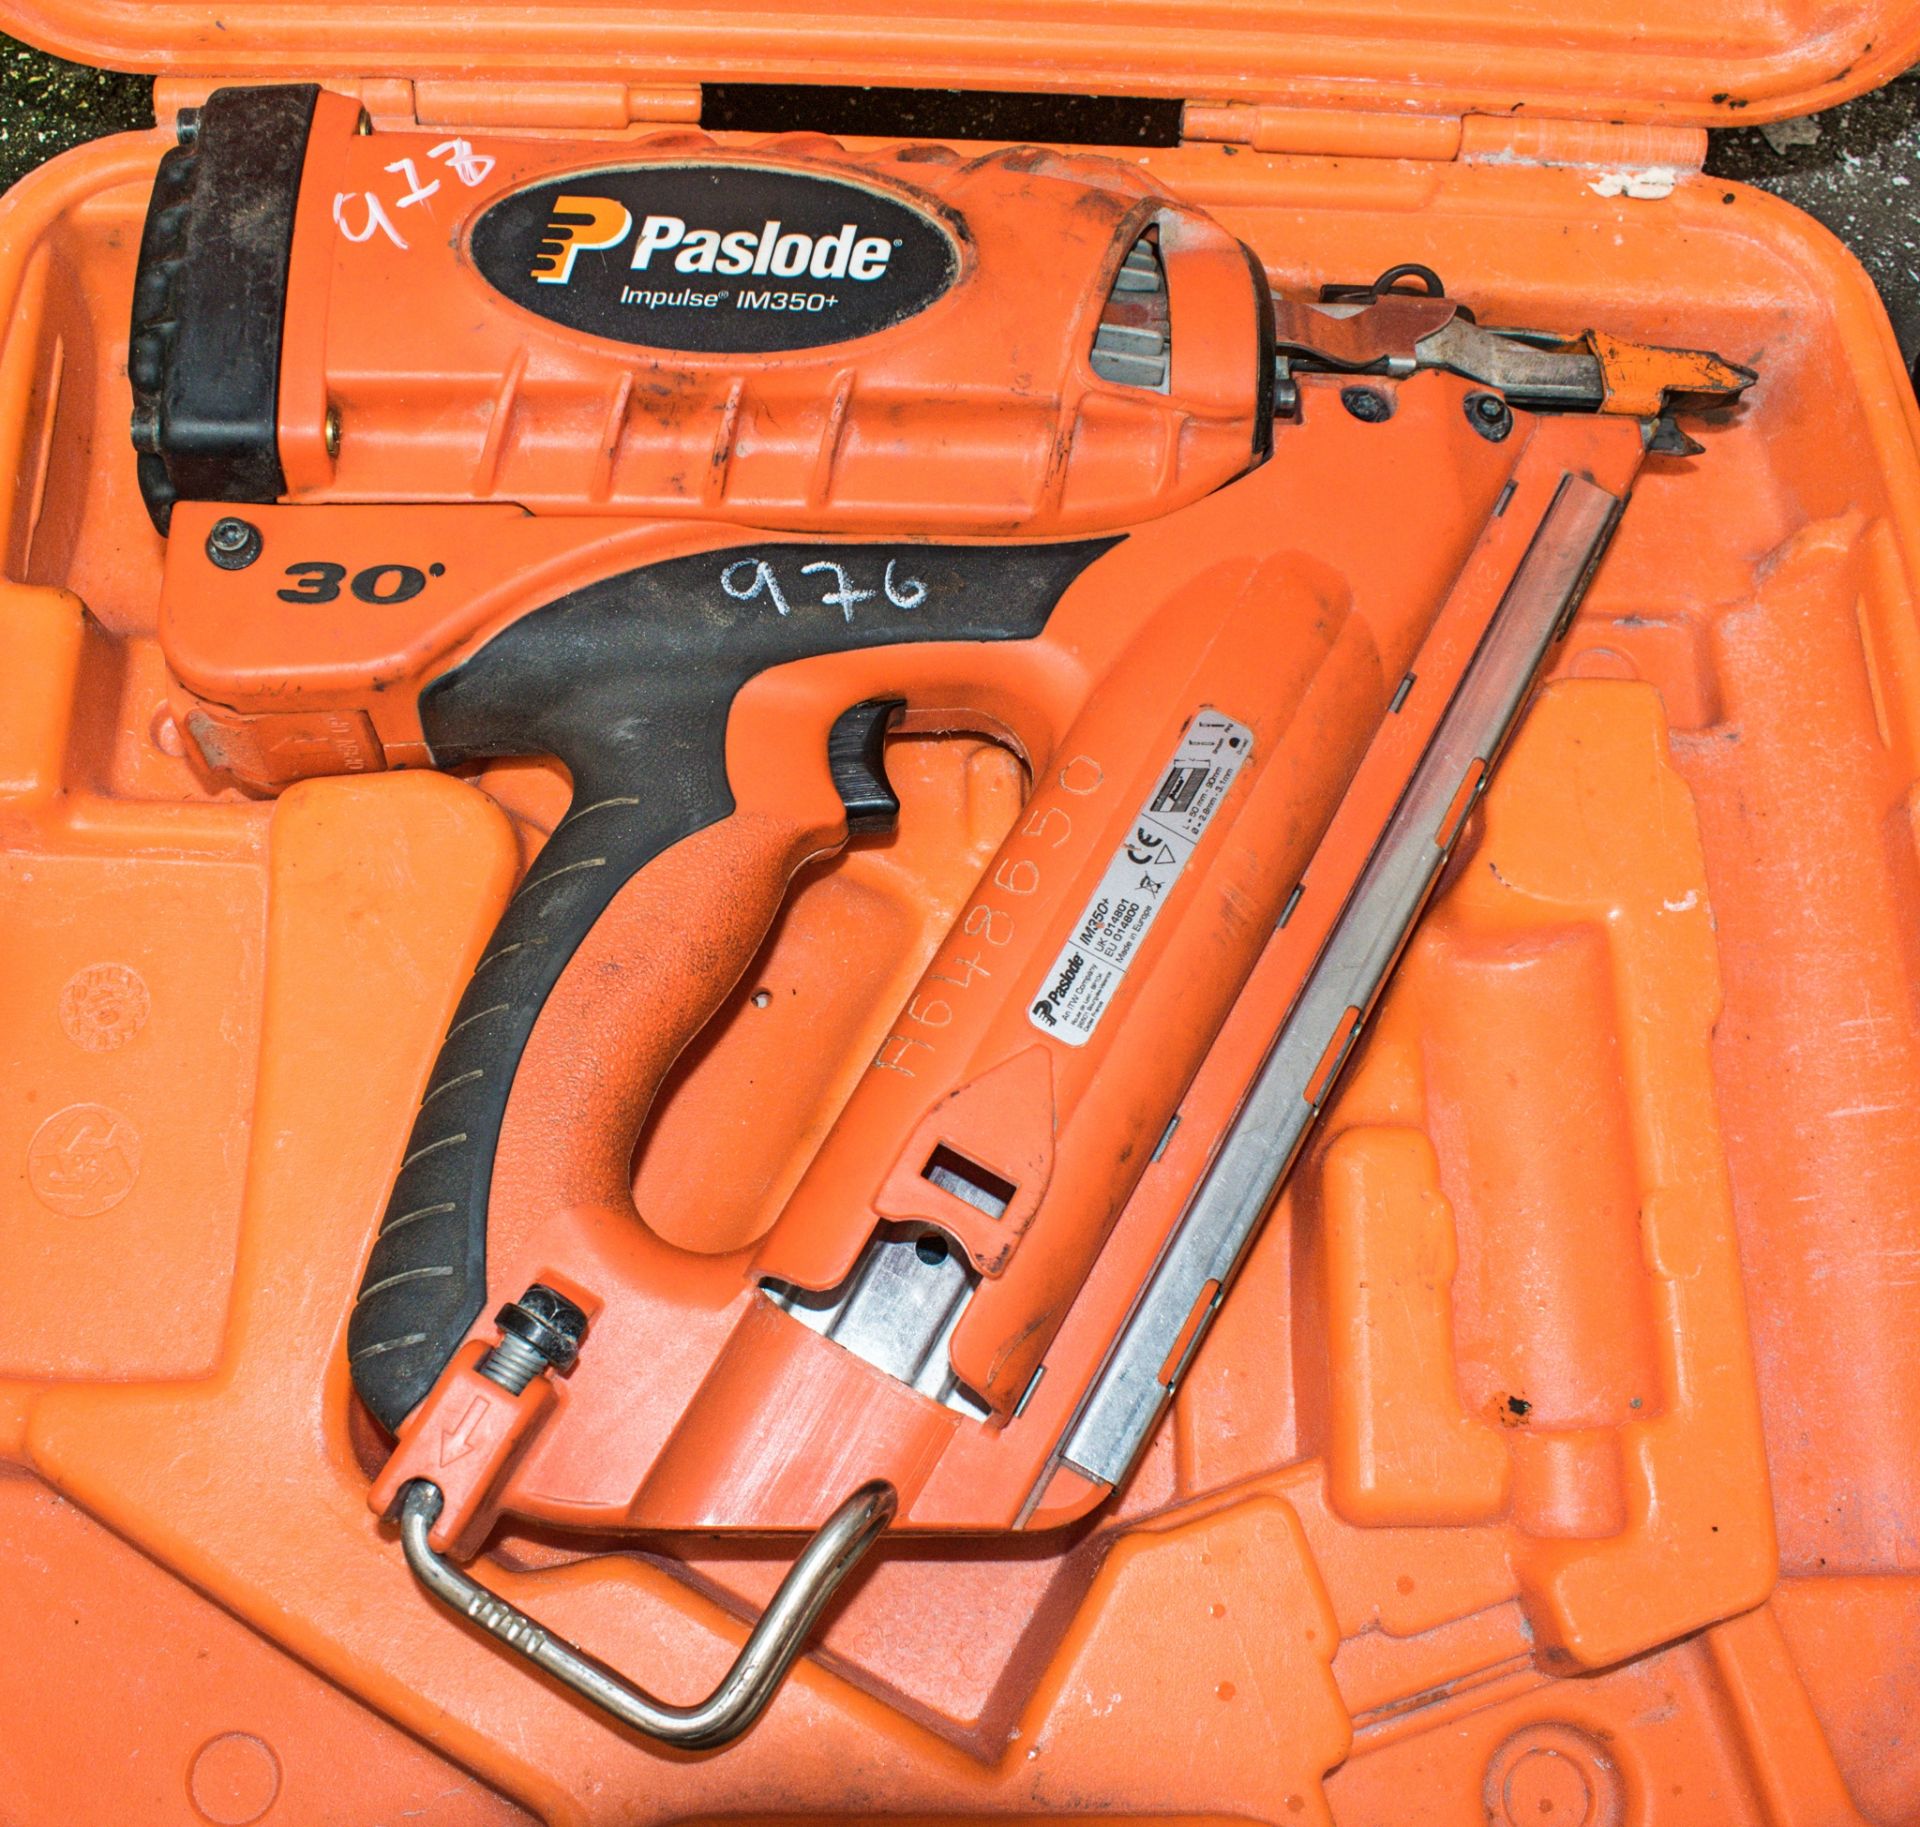 Paslode IM350 cordless nailgun c/w carry case ** No battery or charger **